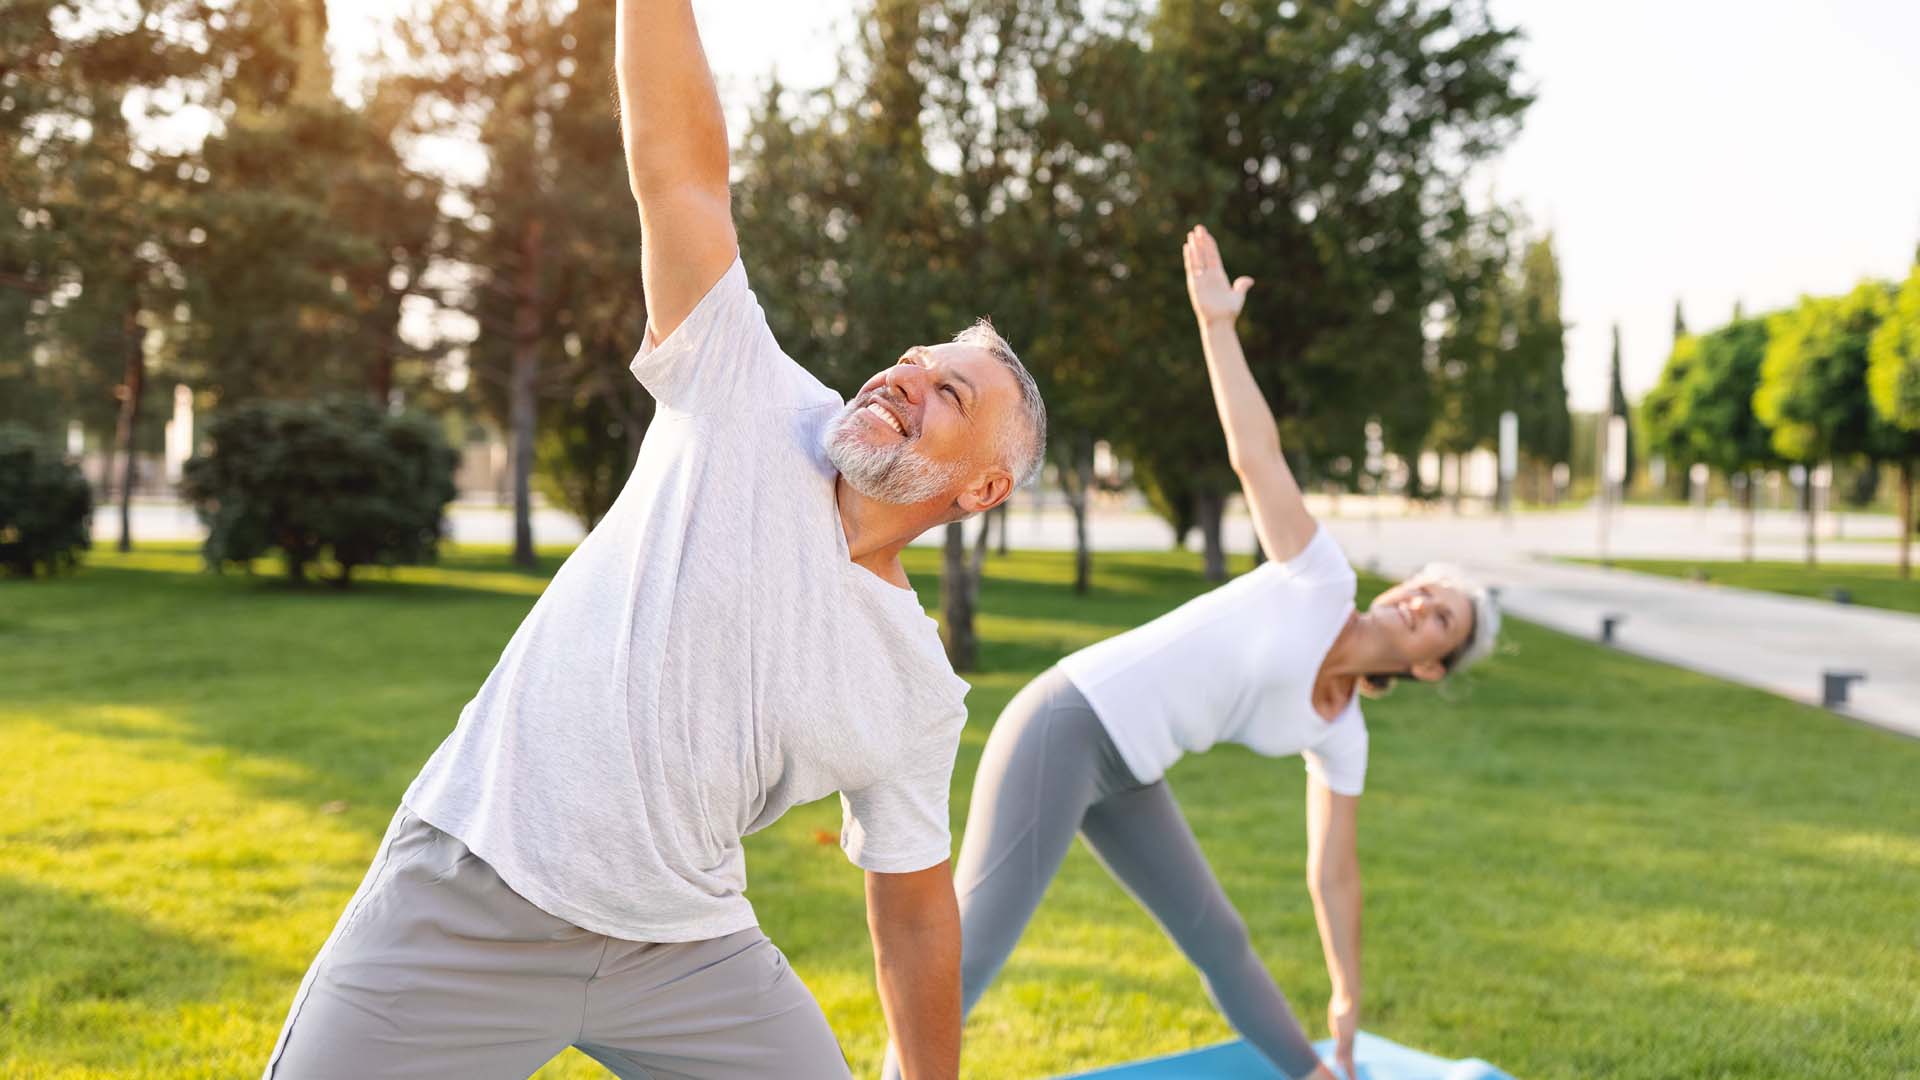 A man and woman doing yoga triangle pose.